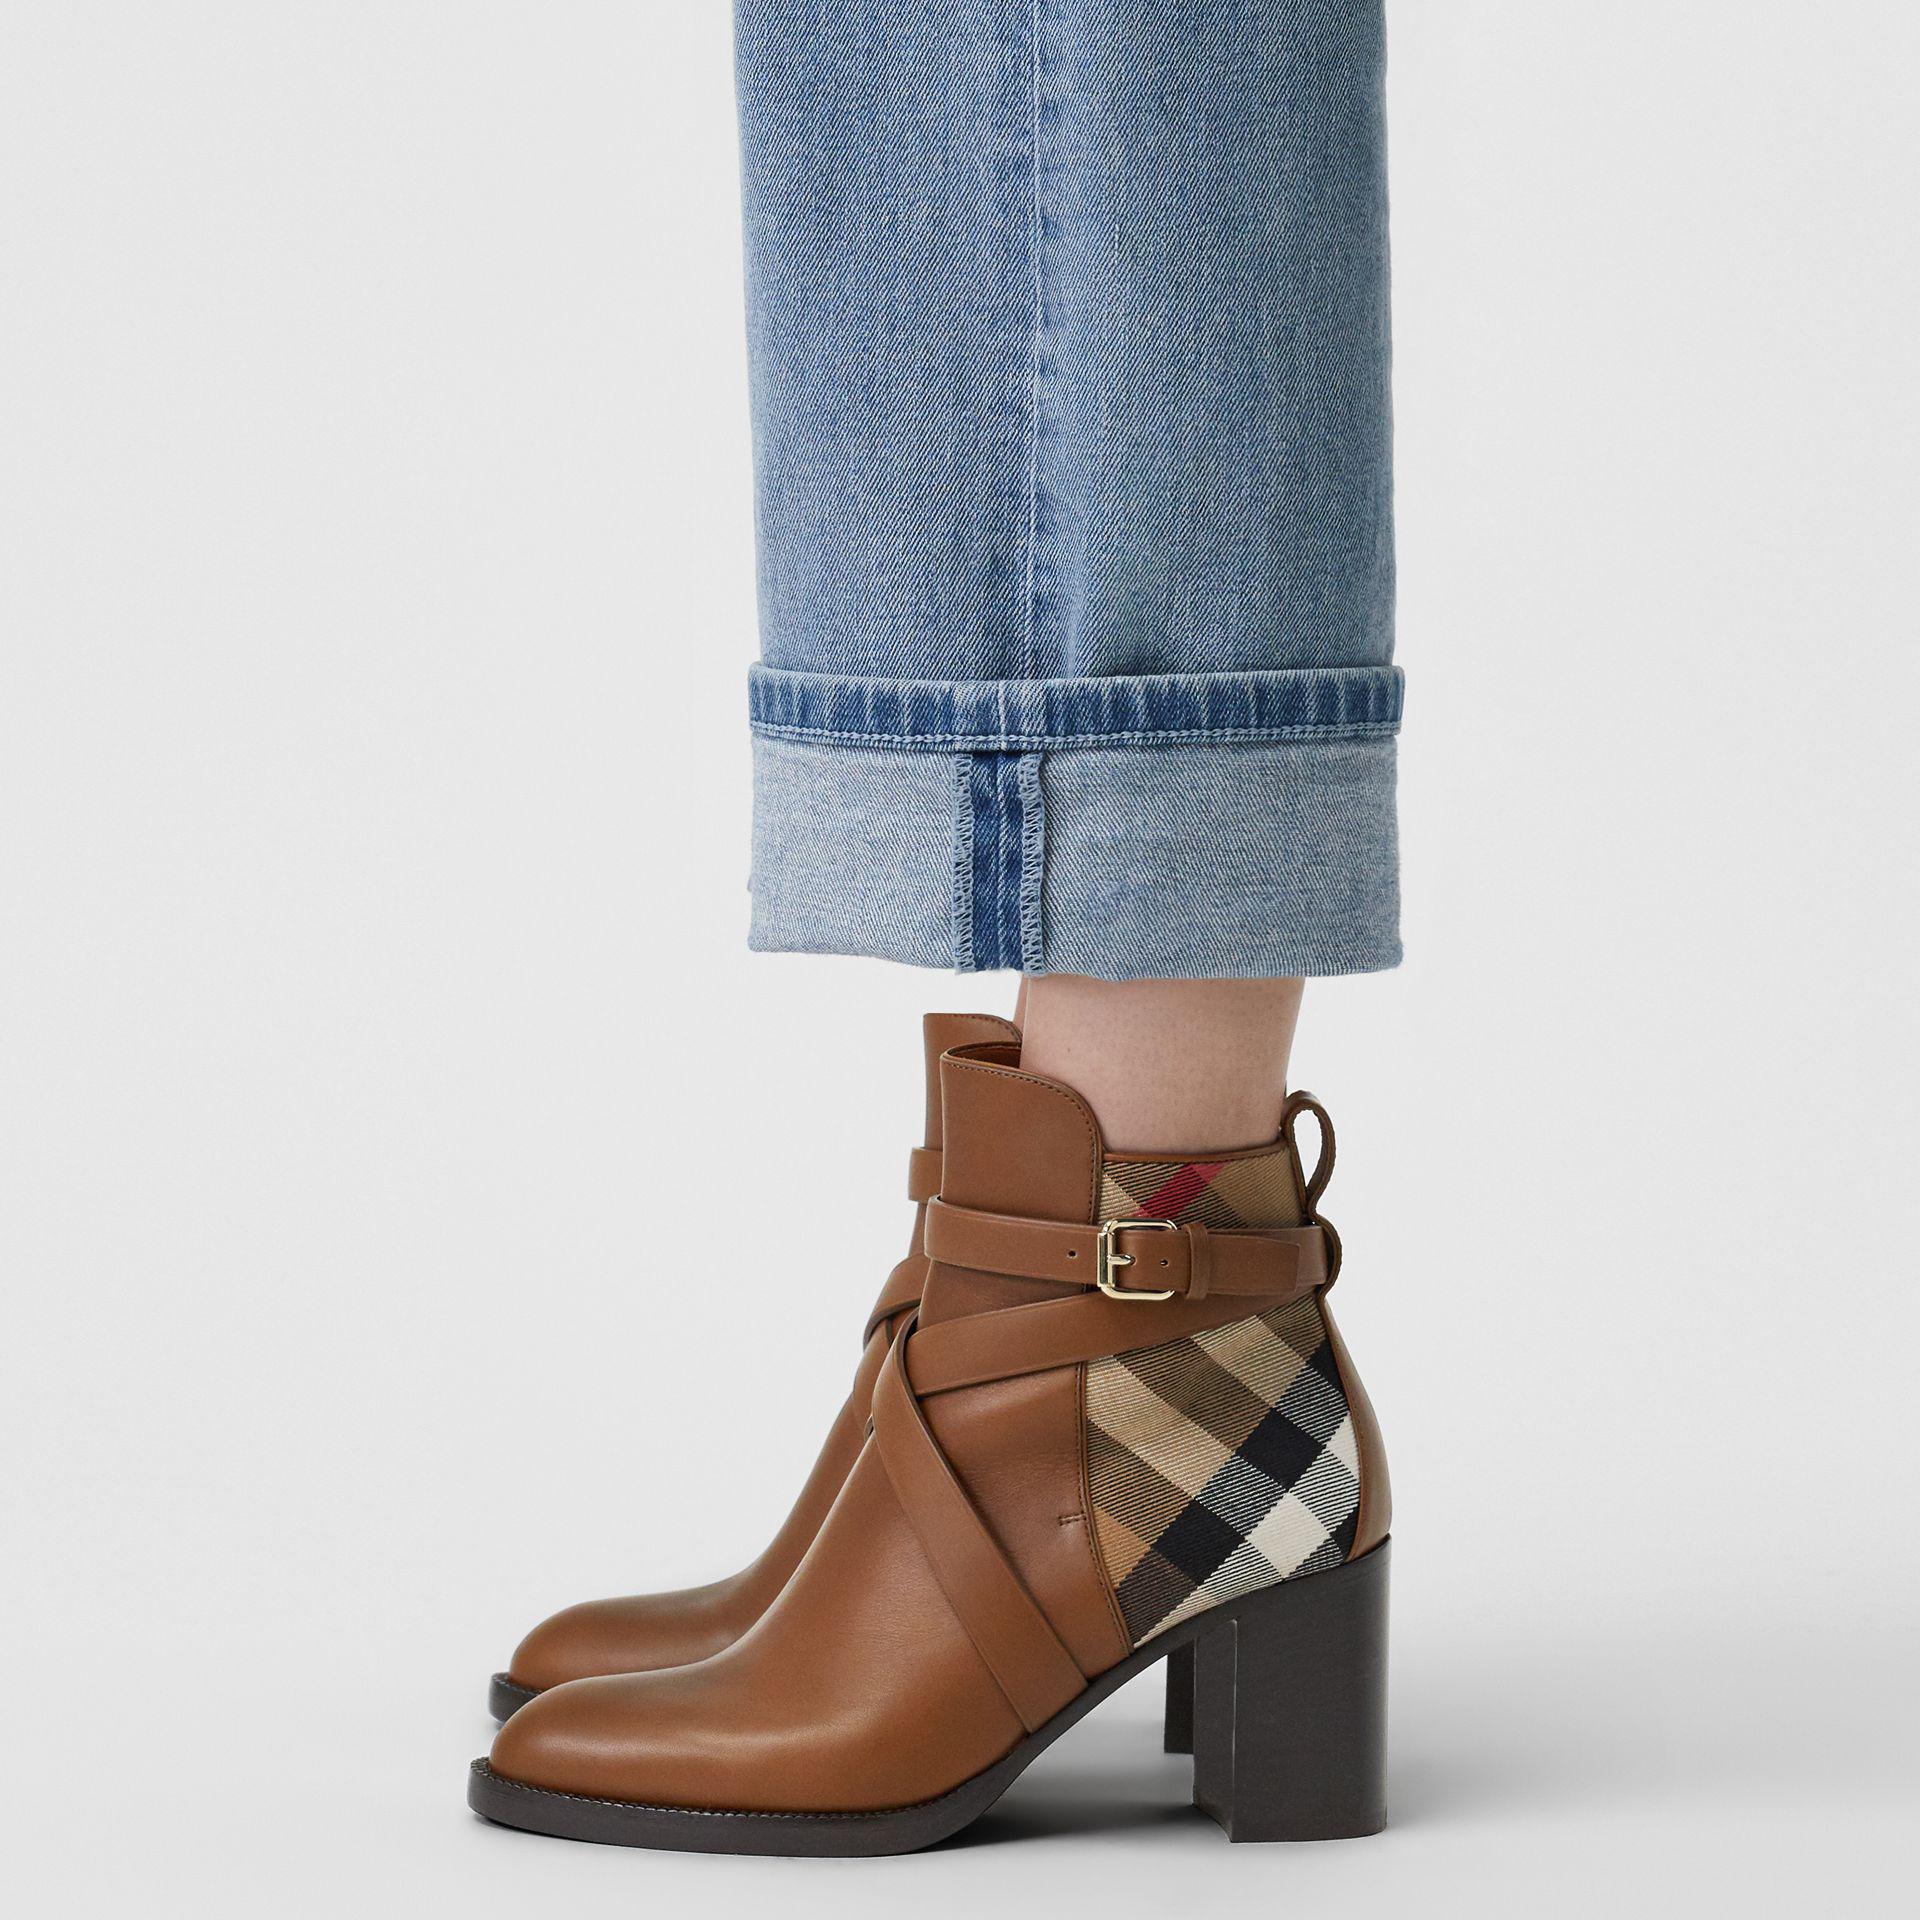 Burberry House Check And Leather Ankle Boots Bright Camel in Natural | Lyst